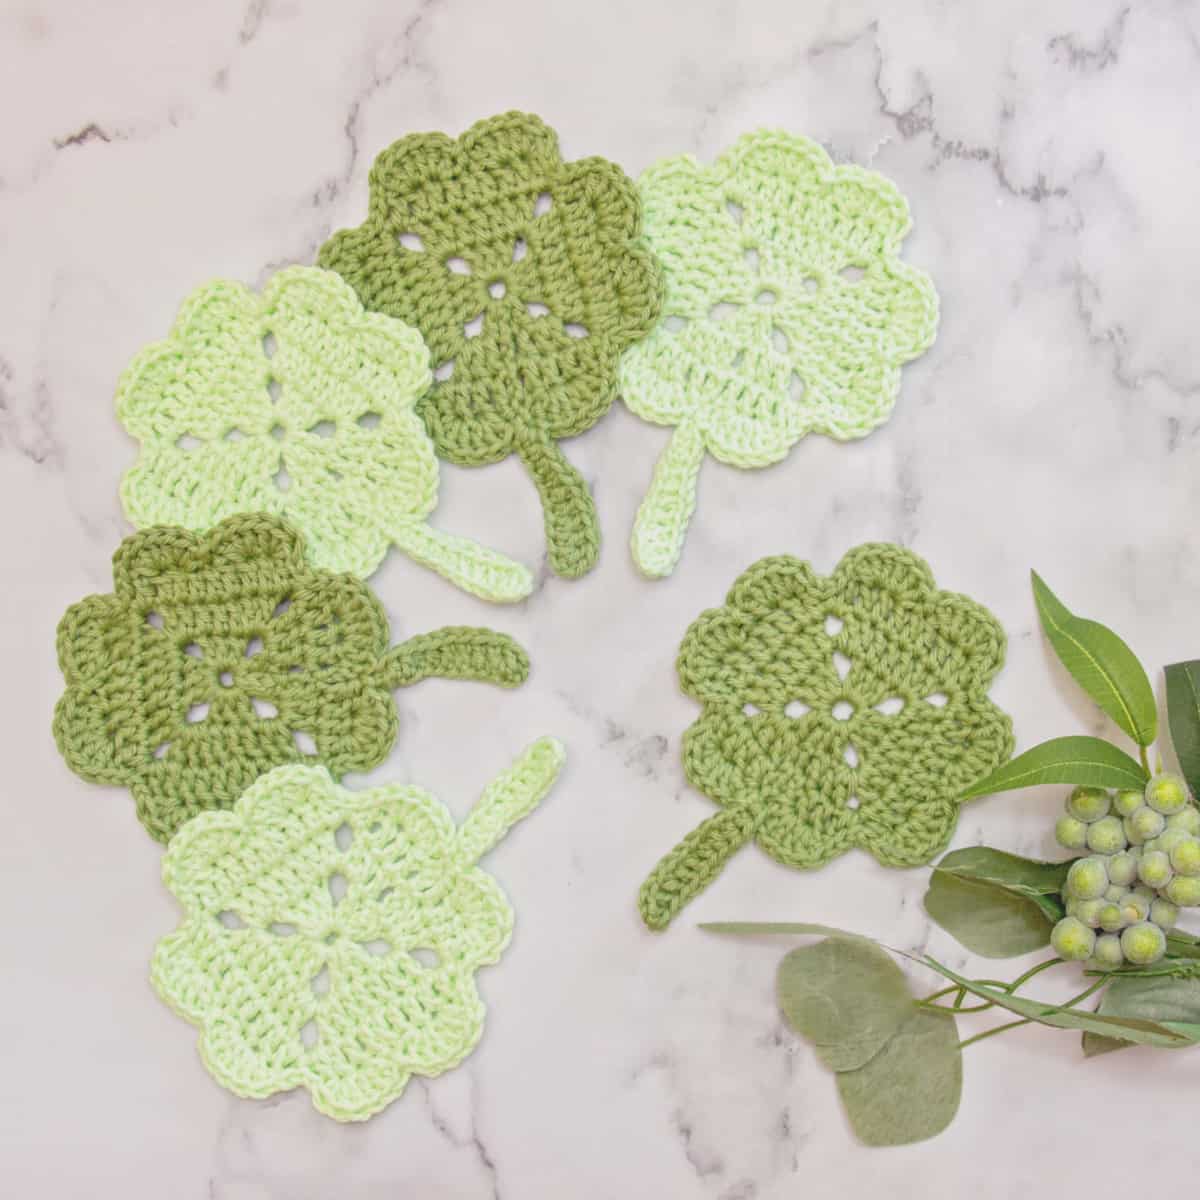 Shamrock Crochet Coaster Pattern | Quick And Cute Decor For St. Patrick's Day